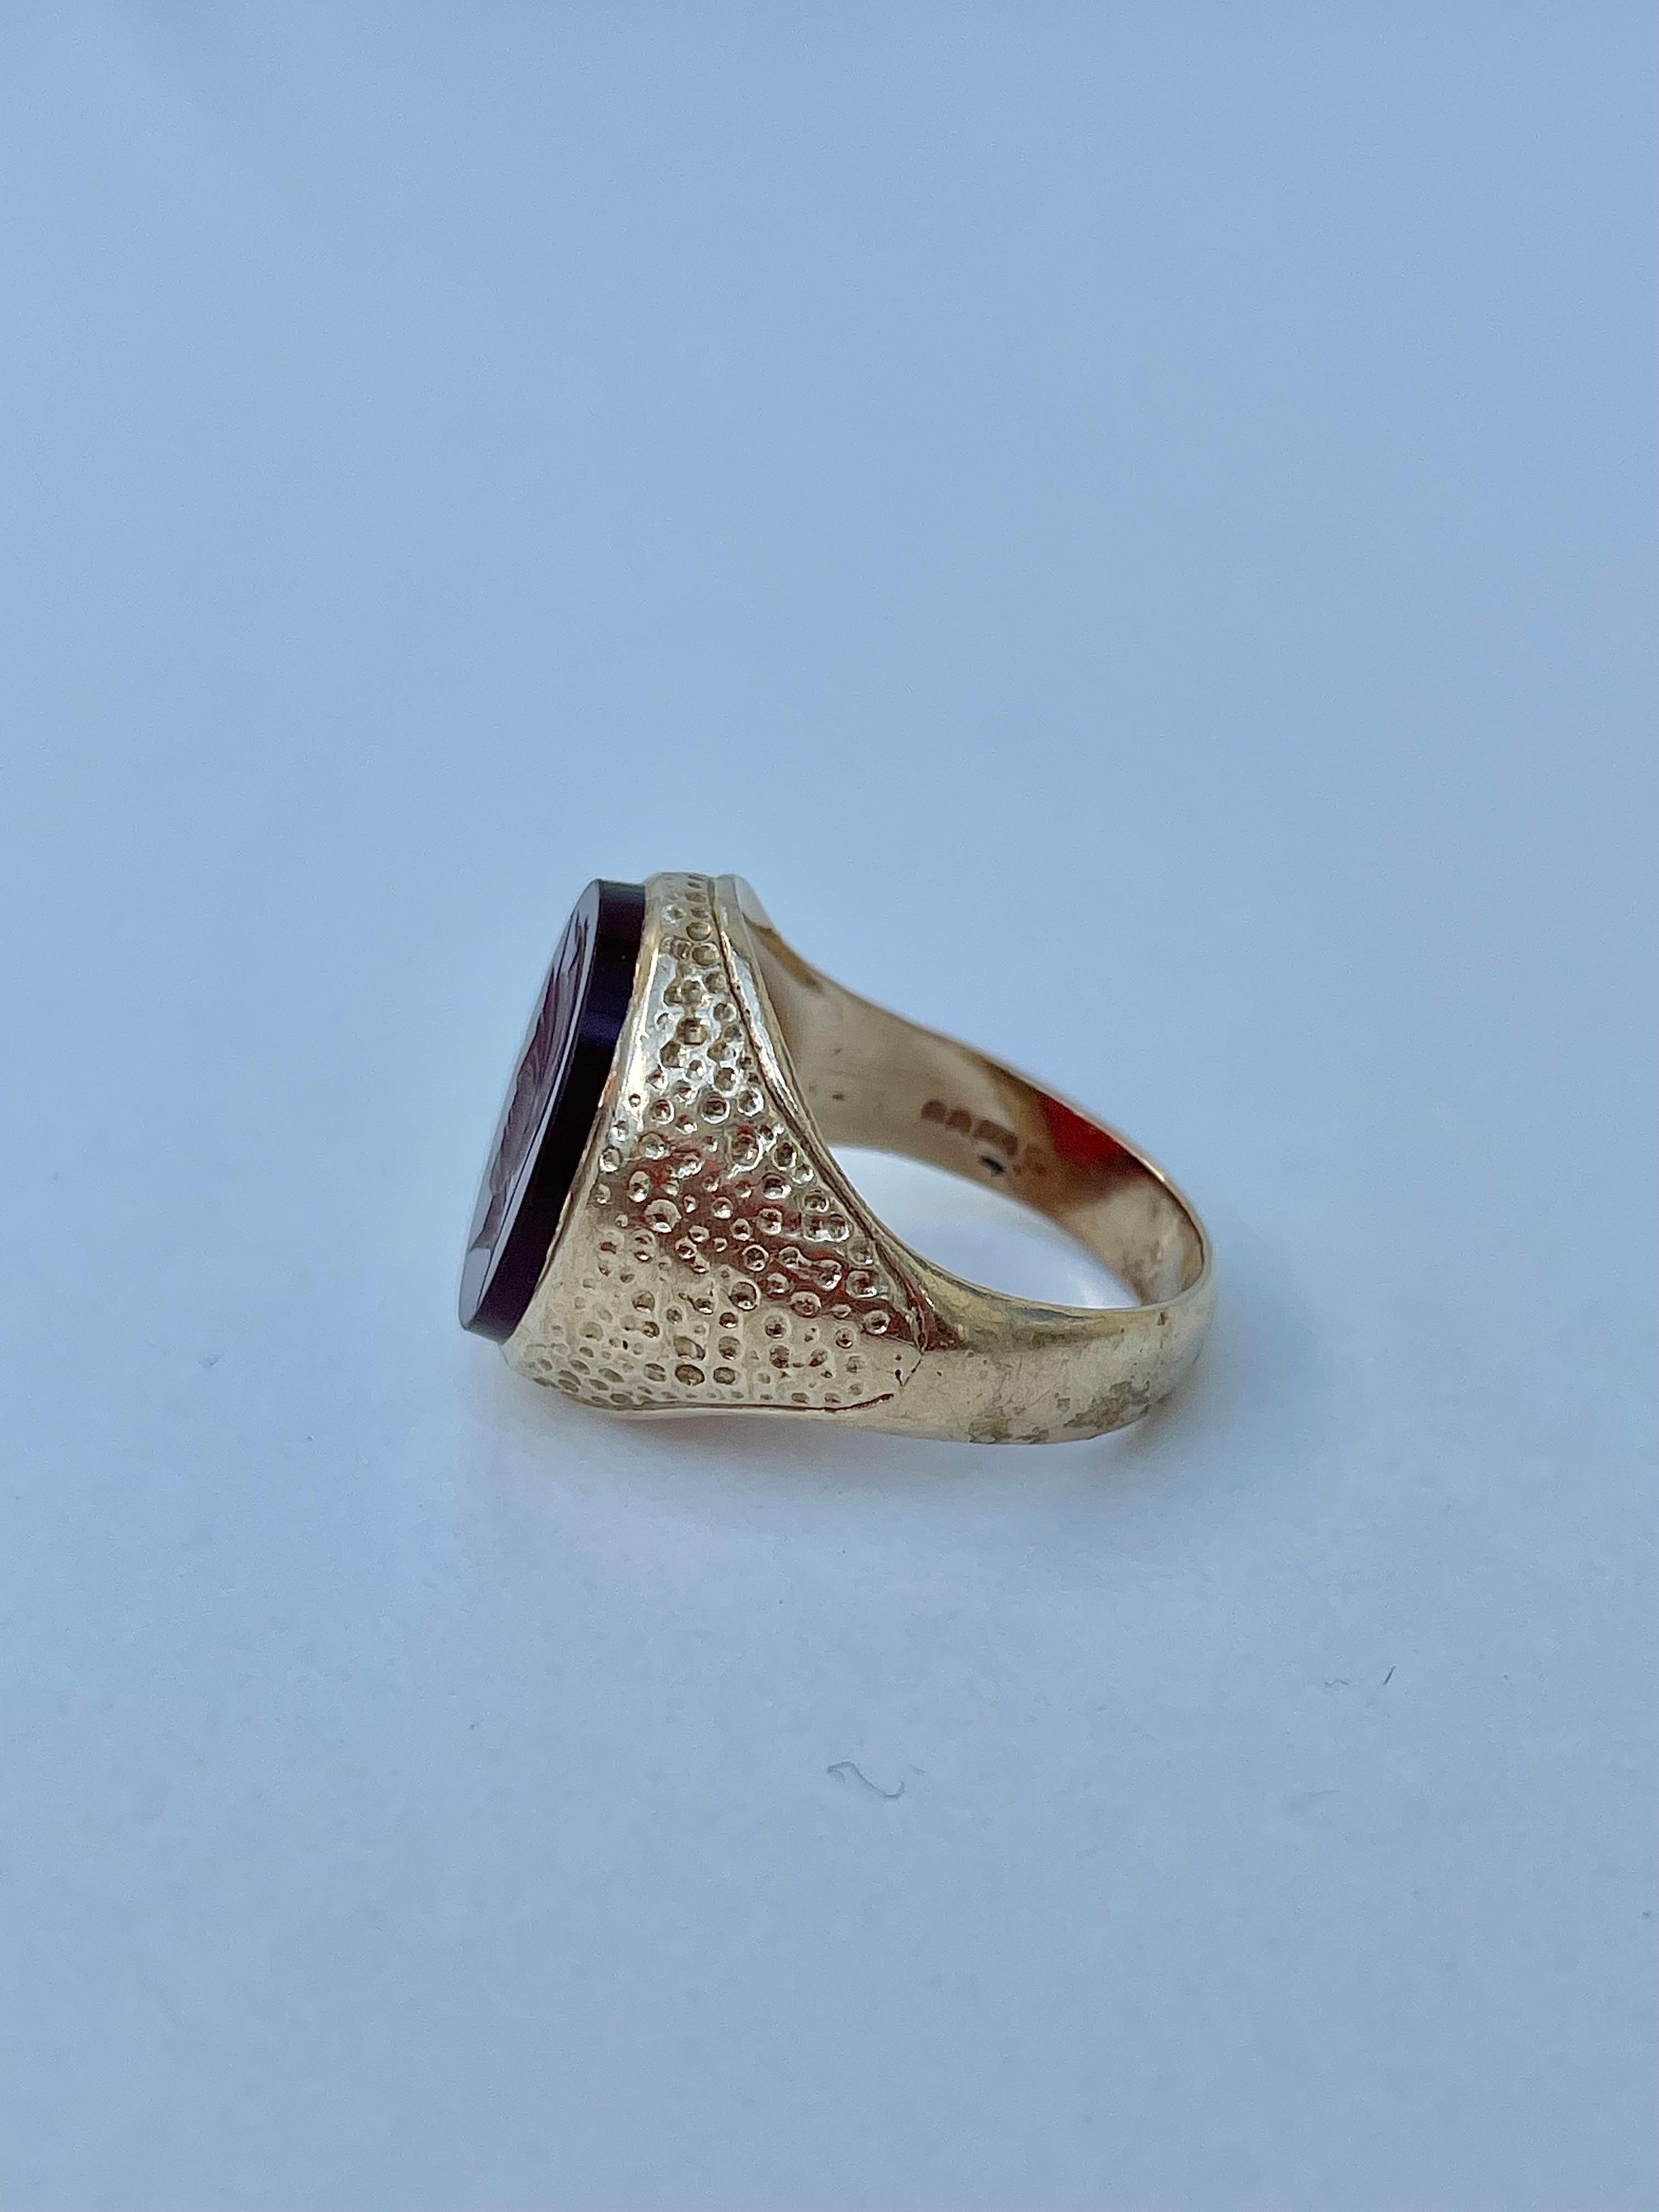 Vintage Carnelian Large Signet Ring in 9ct Yellow Gold 

incredible imprint of a man in armour

The item comes without the box in the photos but will be presented in a gift box

Measurements: weight 6.03g, size UK P1/2, head of ring 12.6mm x 17.7mm,